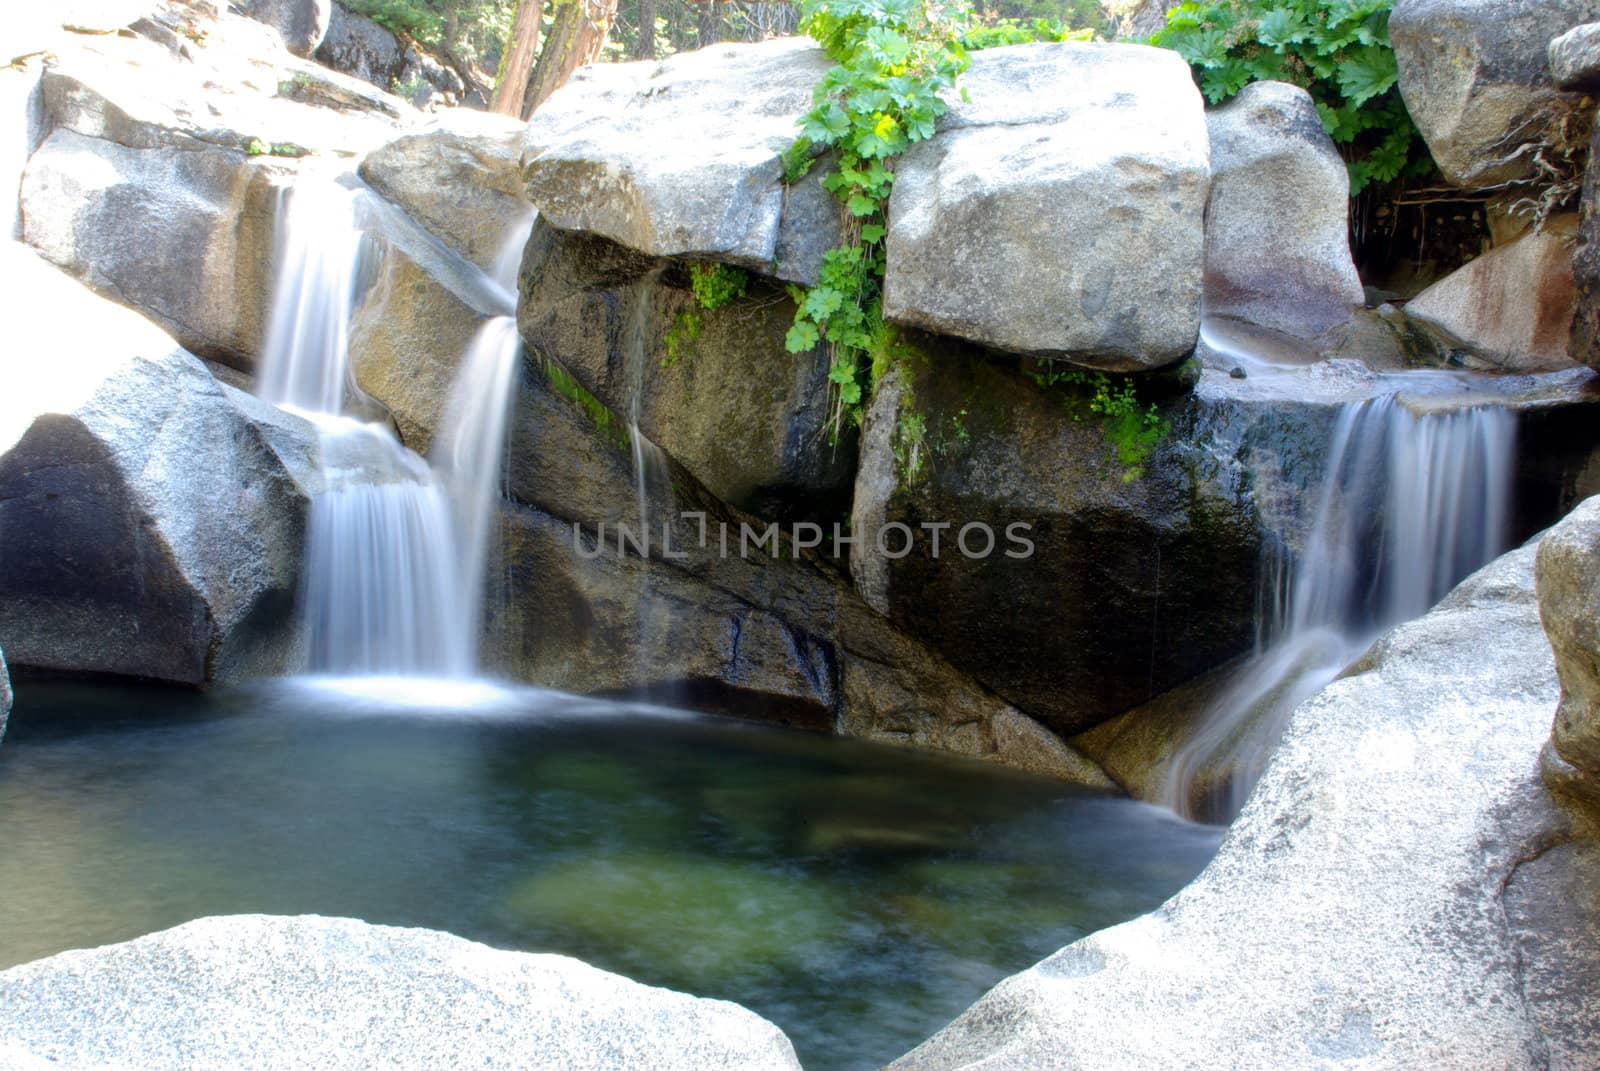 A waterfall in summertime located in the Crystal Basin Wilderness area in California.